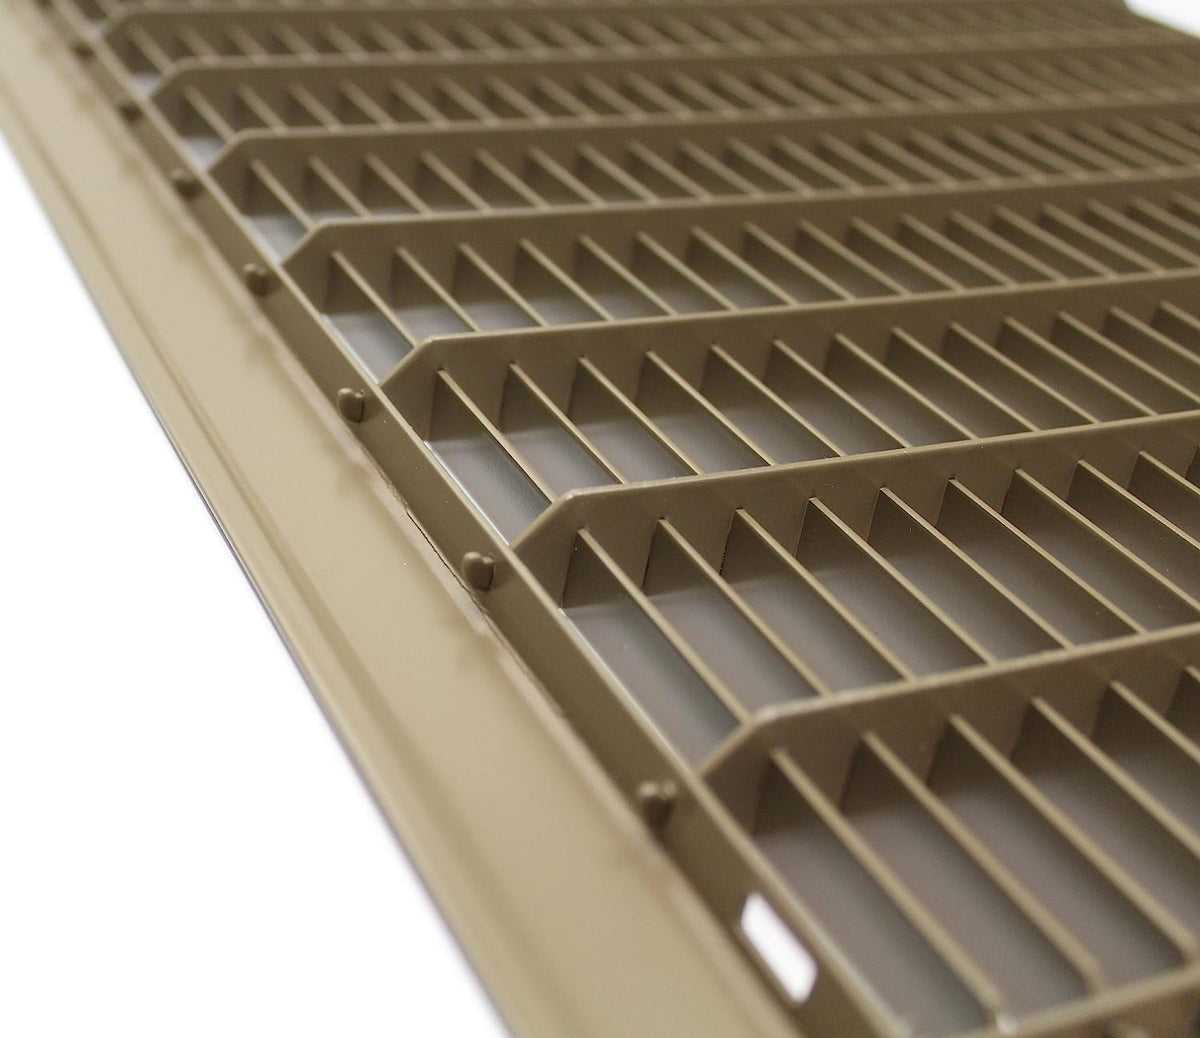 4&quot; X 20&quot; Or 20&quot; X 4&quot; Heavy Duty Floor Grille - Fixed Blades Air Grille - Brown [Outer Dimensions: 5.75 X 21.75]